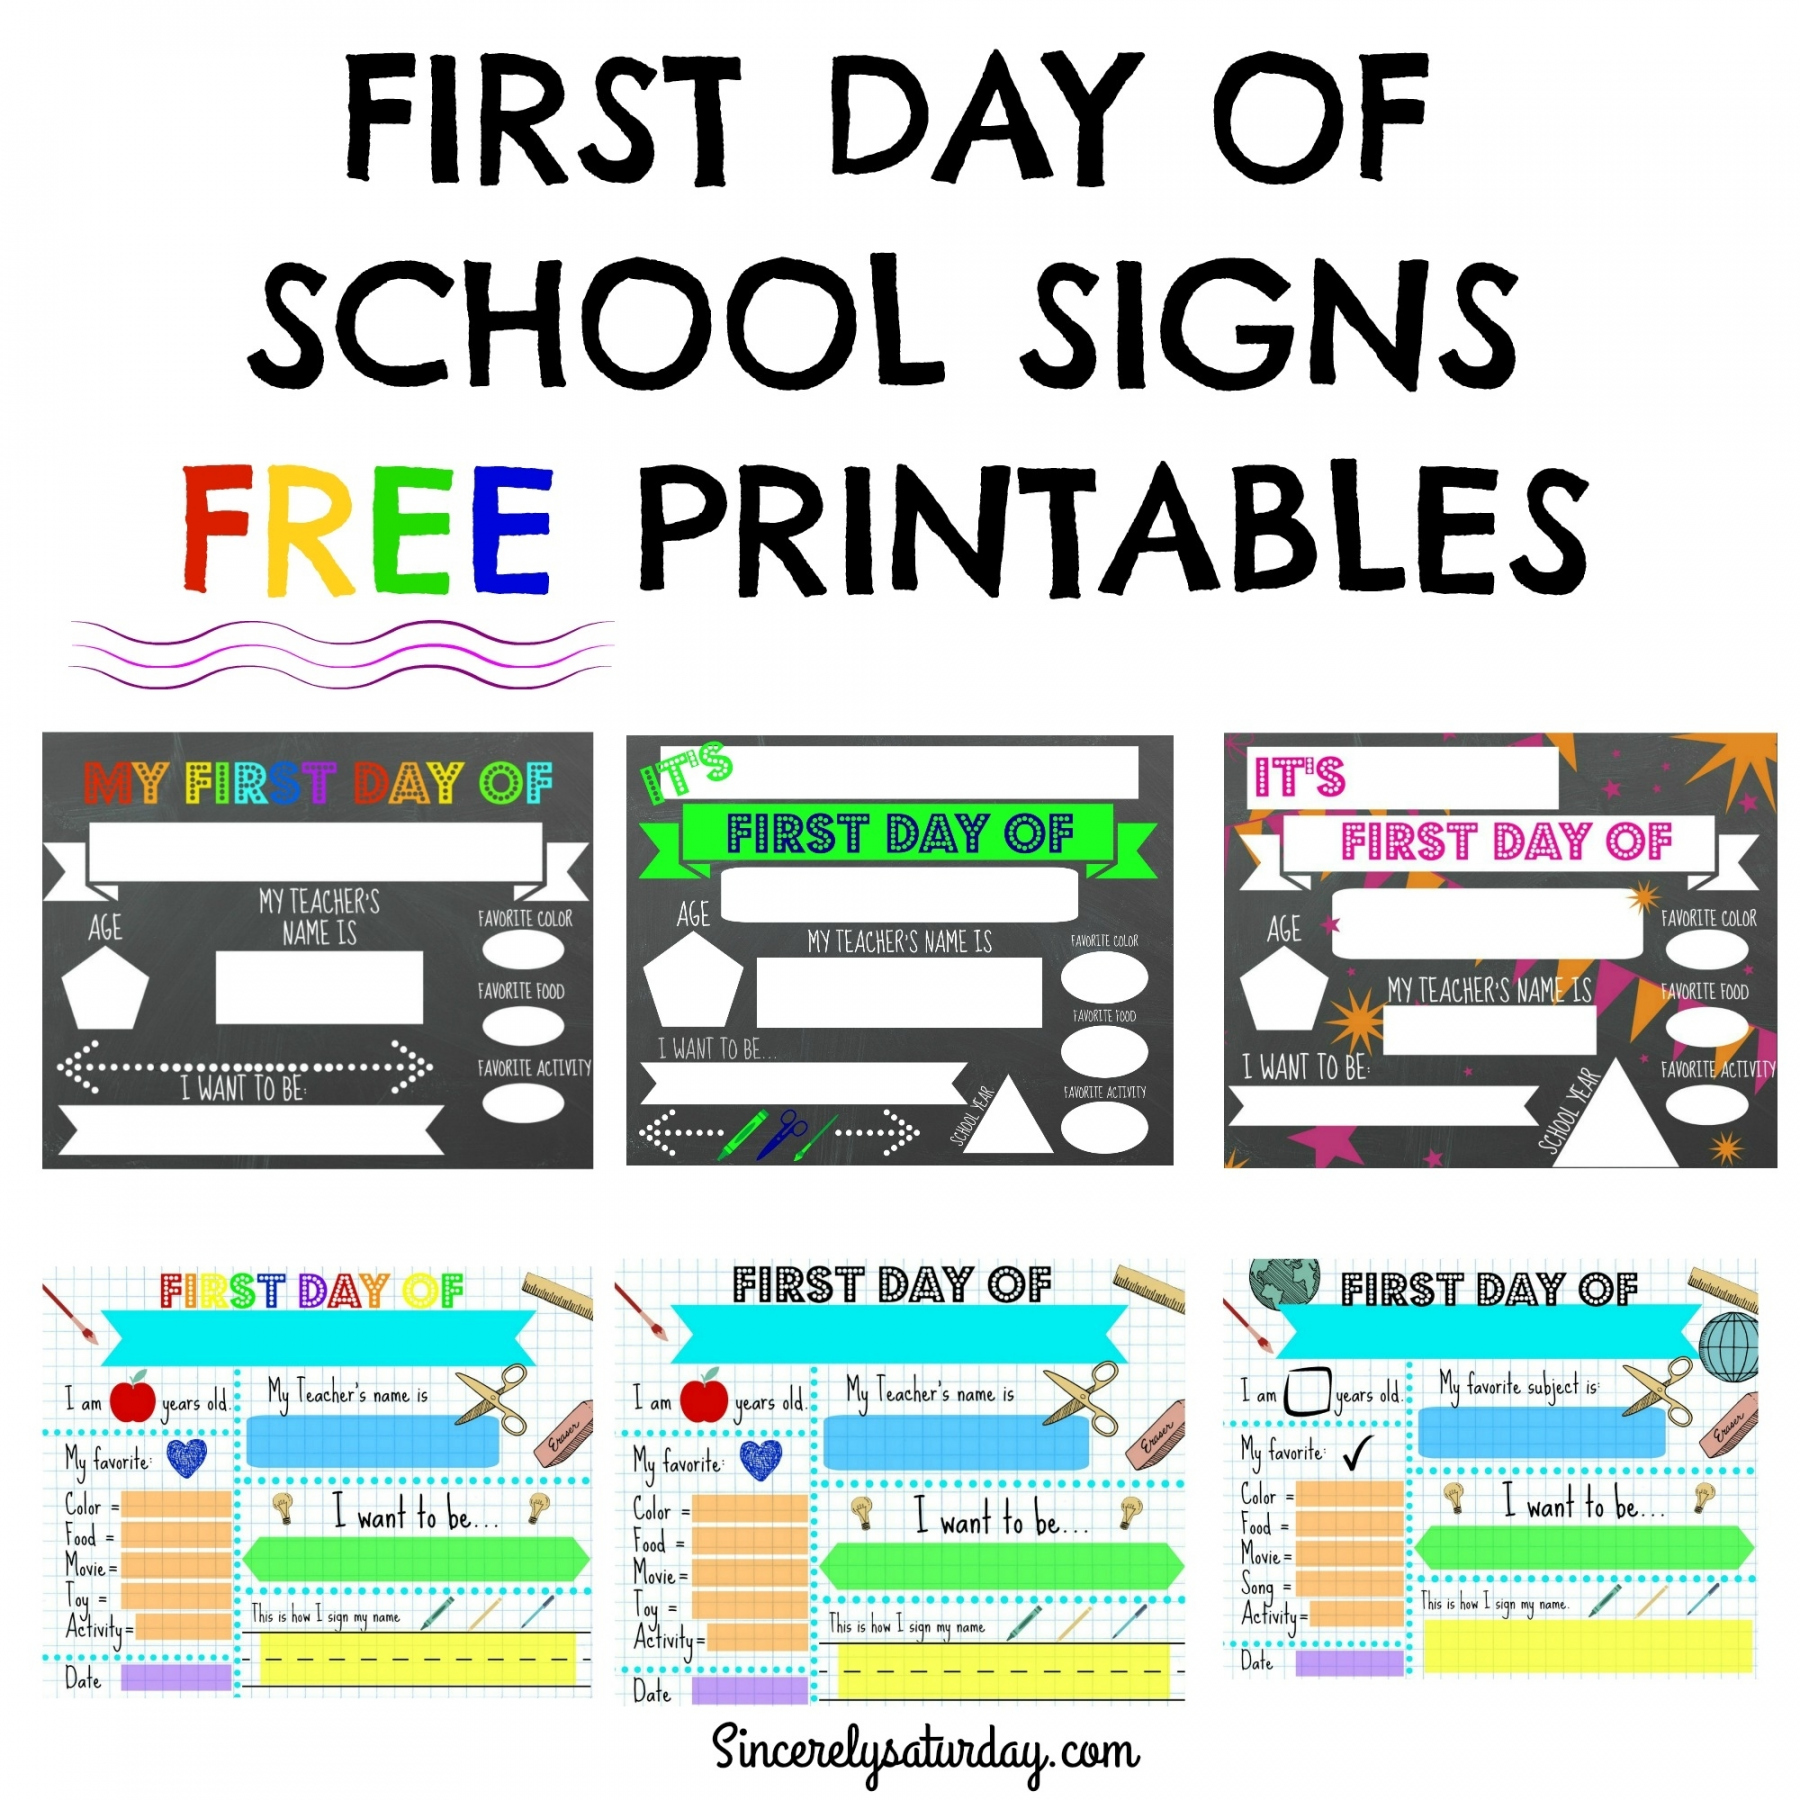 FREE PRINTABLE FIRST DAY OF SCHOOL SIGNS - Sincerely Saturday - FREE Printables - Free Printable First Day Of Kindergarten Sign